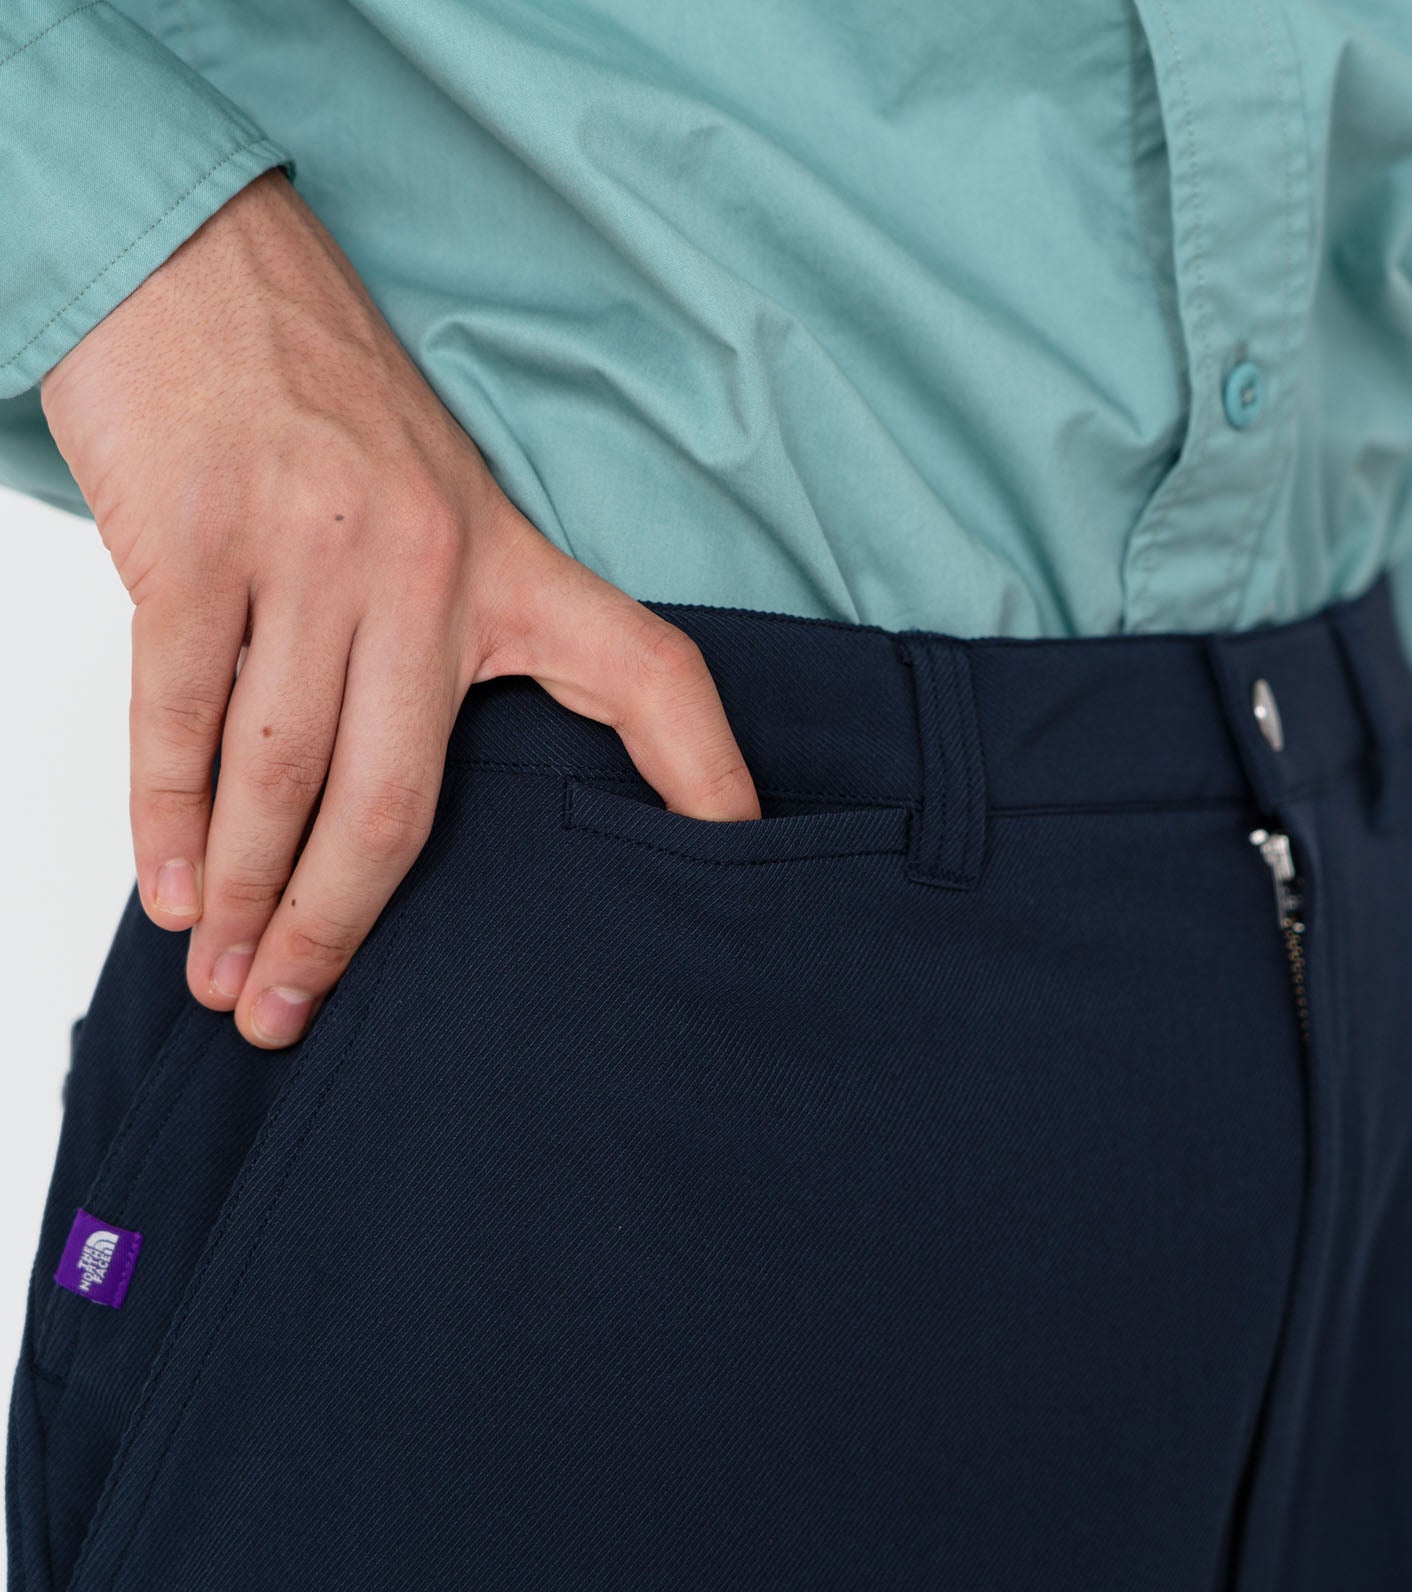 THE NORTH FACE PURPLE LABEL Stretch Twill Wide Tapered Field Pants